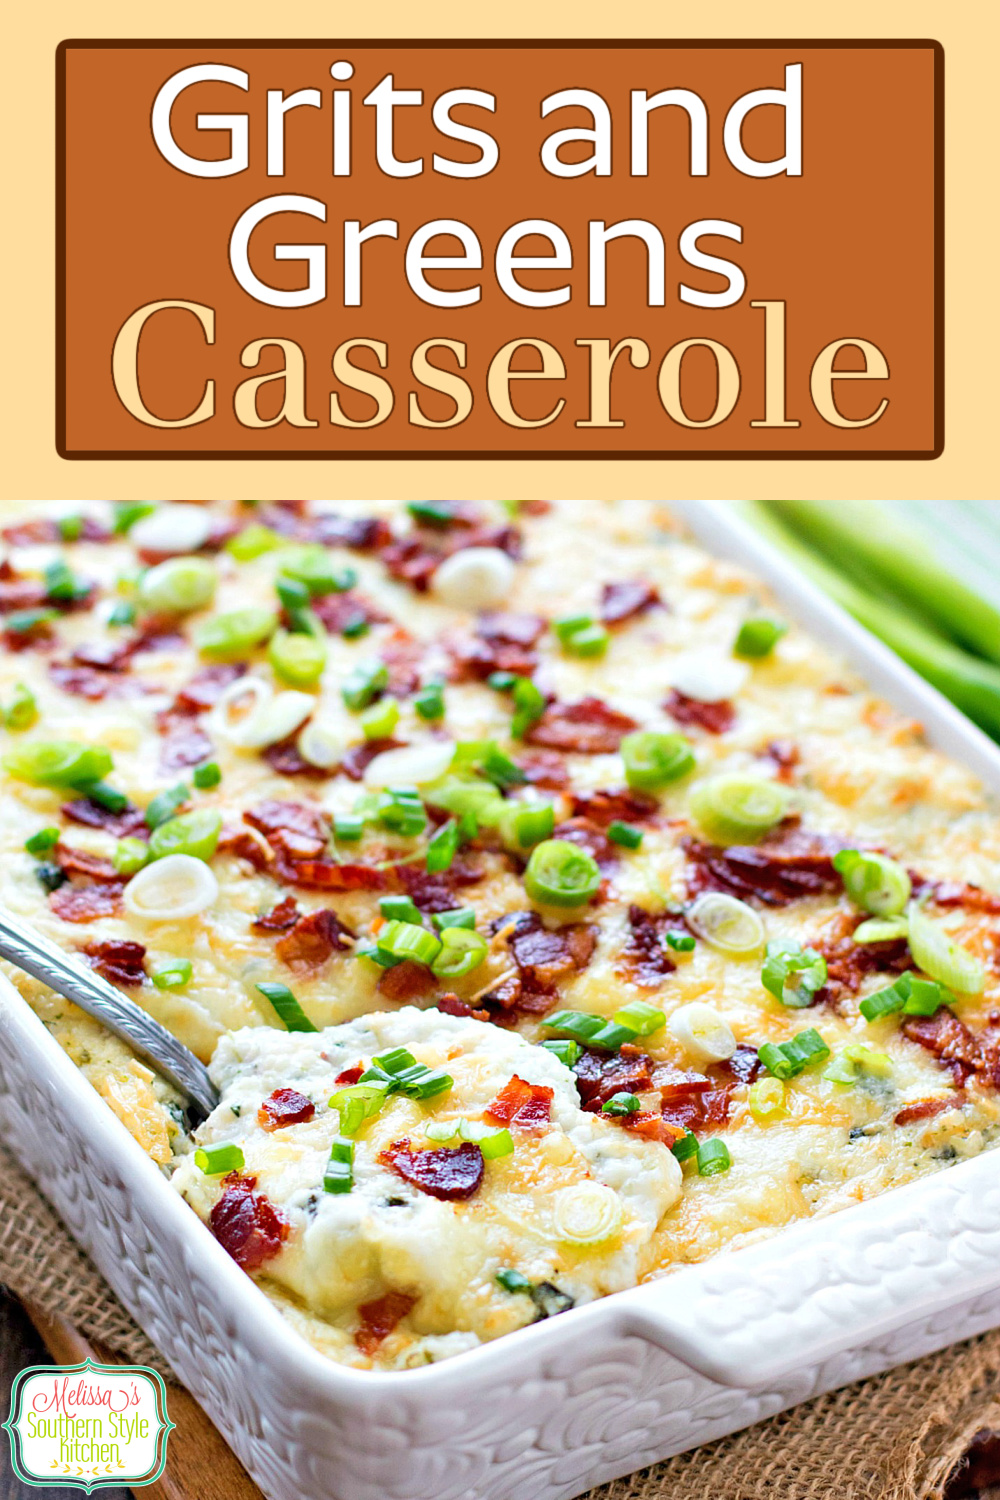 Two favorites collide in this mouthwatering Southern Grits and Greens Casserole. Serve it for brunch, breakfast or as a side dish #grits #collardgreens #southerngrits #gritsrecipes #gritscasserole #gritsandgreenscasserole #collardgreensrecipe #southernrecipes via @melissasssk